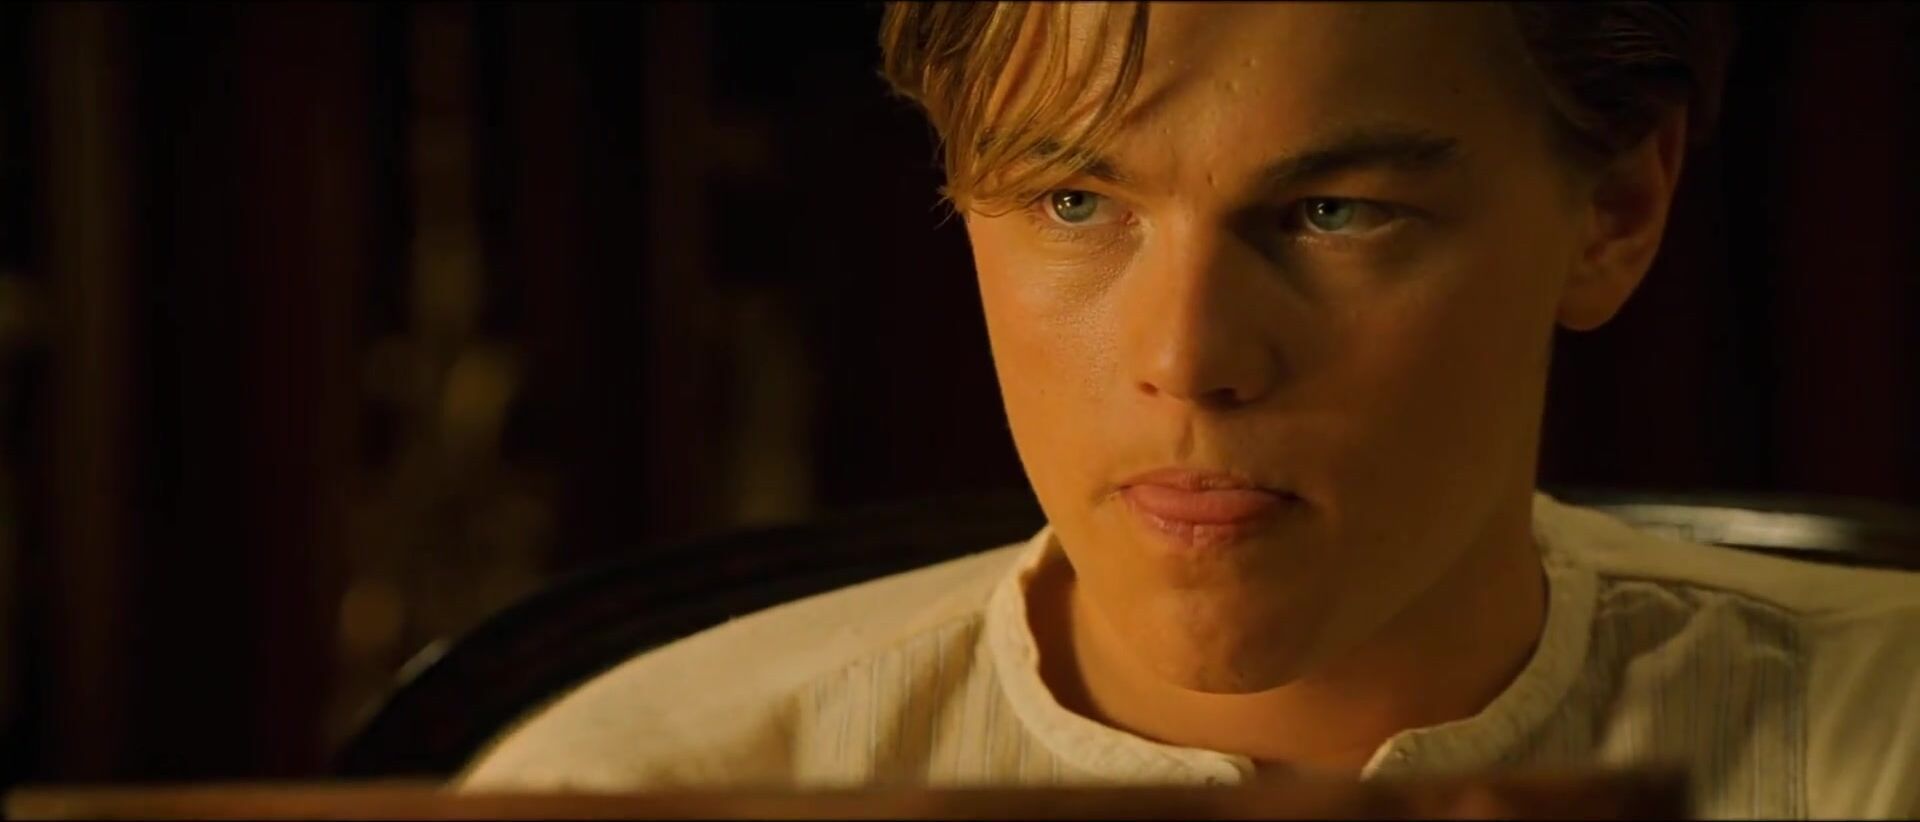 Pussyfucking Leonardo DiCaprio loves chick's body and draws her before fucking in Titanic (1997) Step Mom